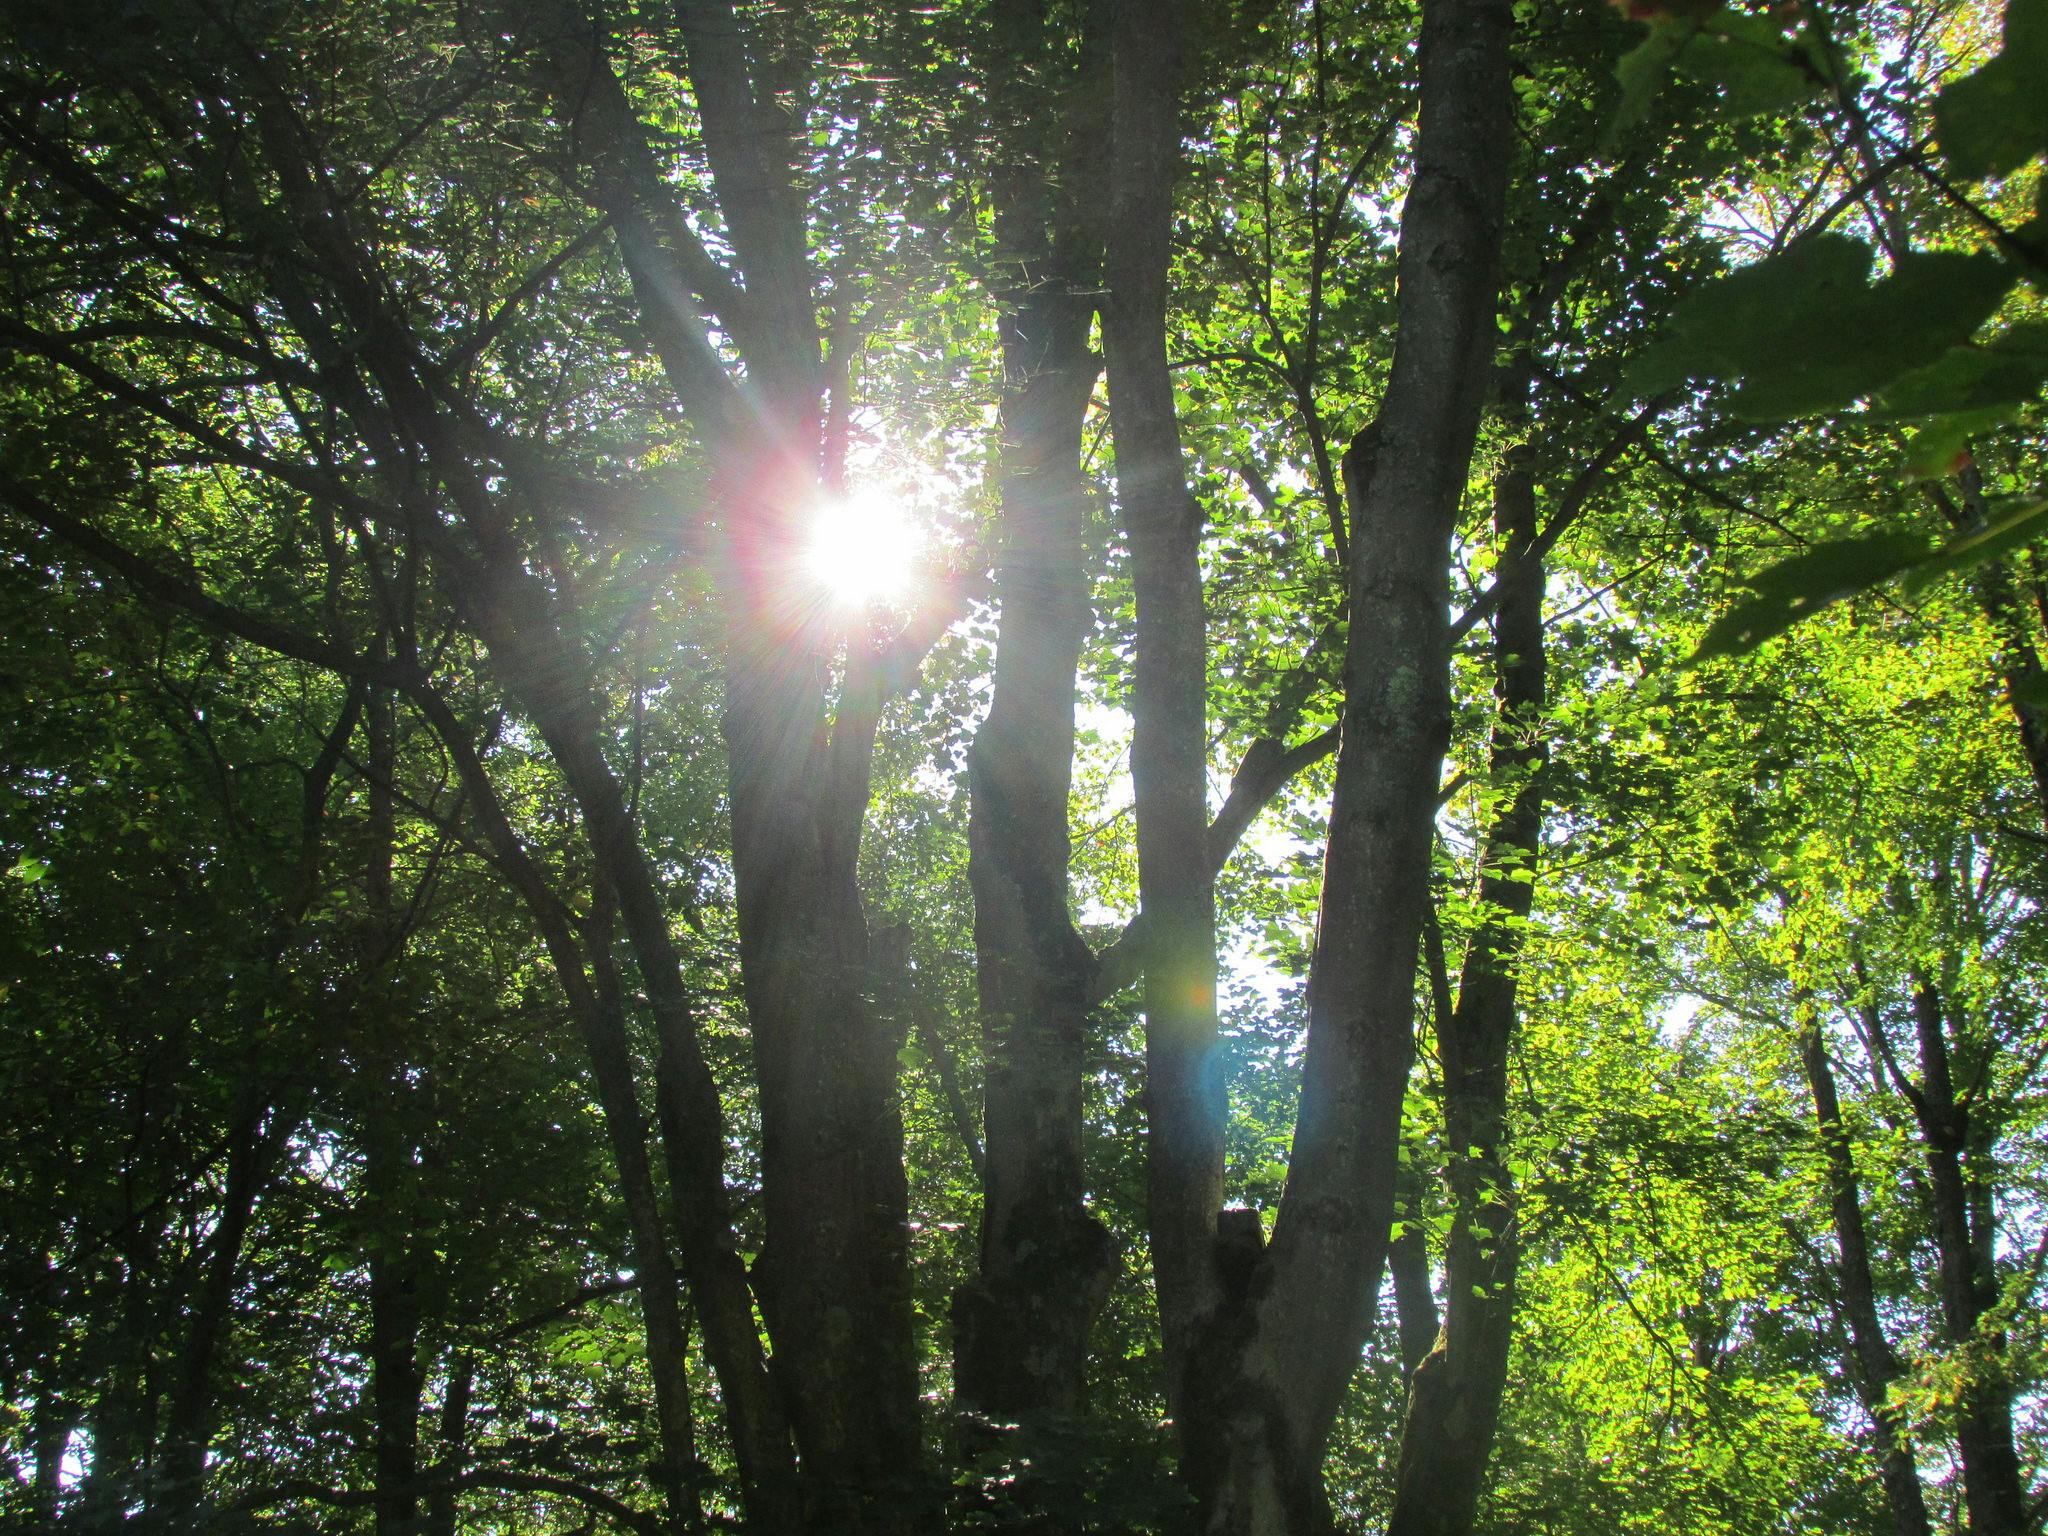 Free stock photo of forest, sun through trees, trees